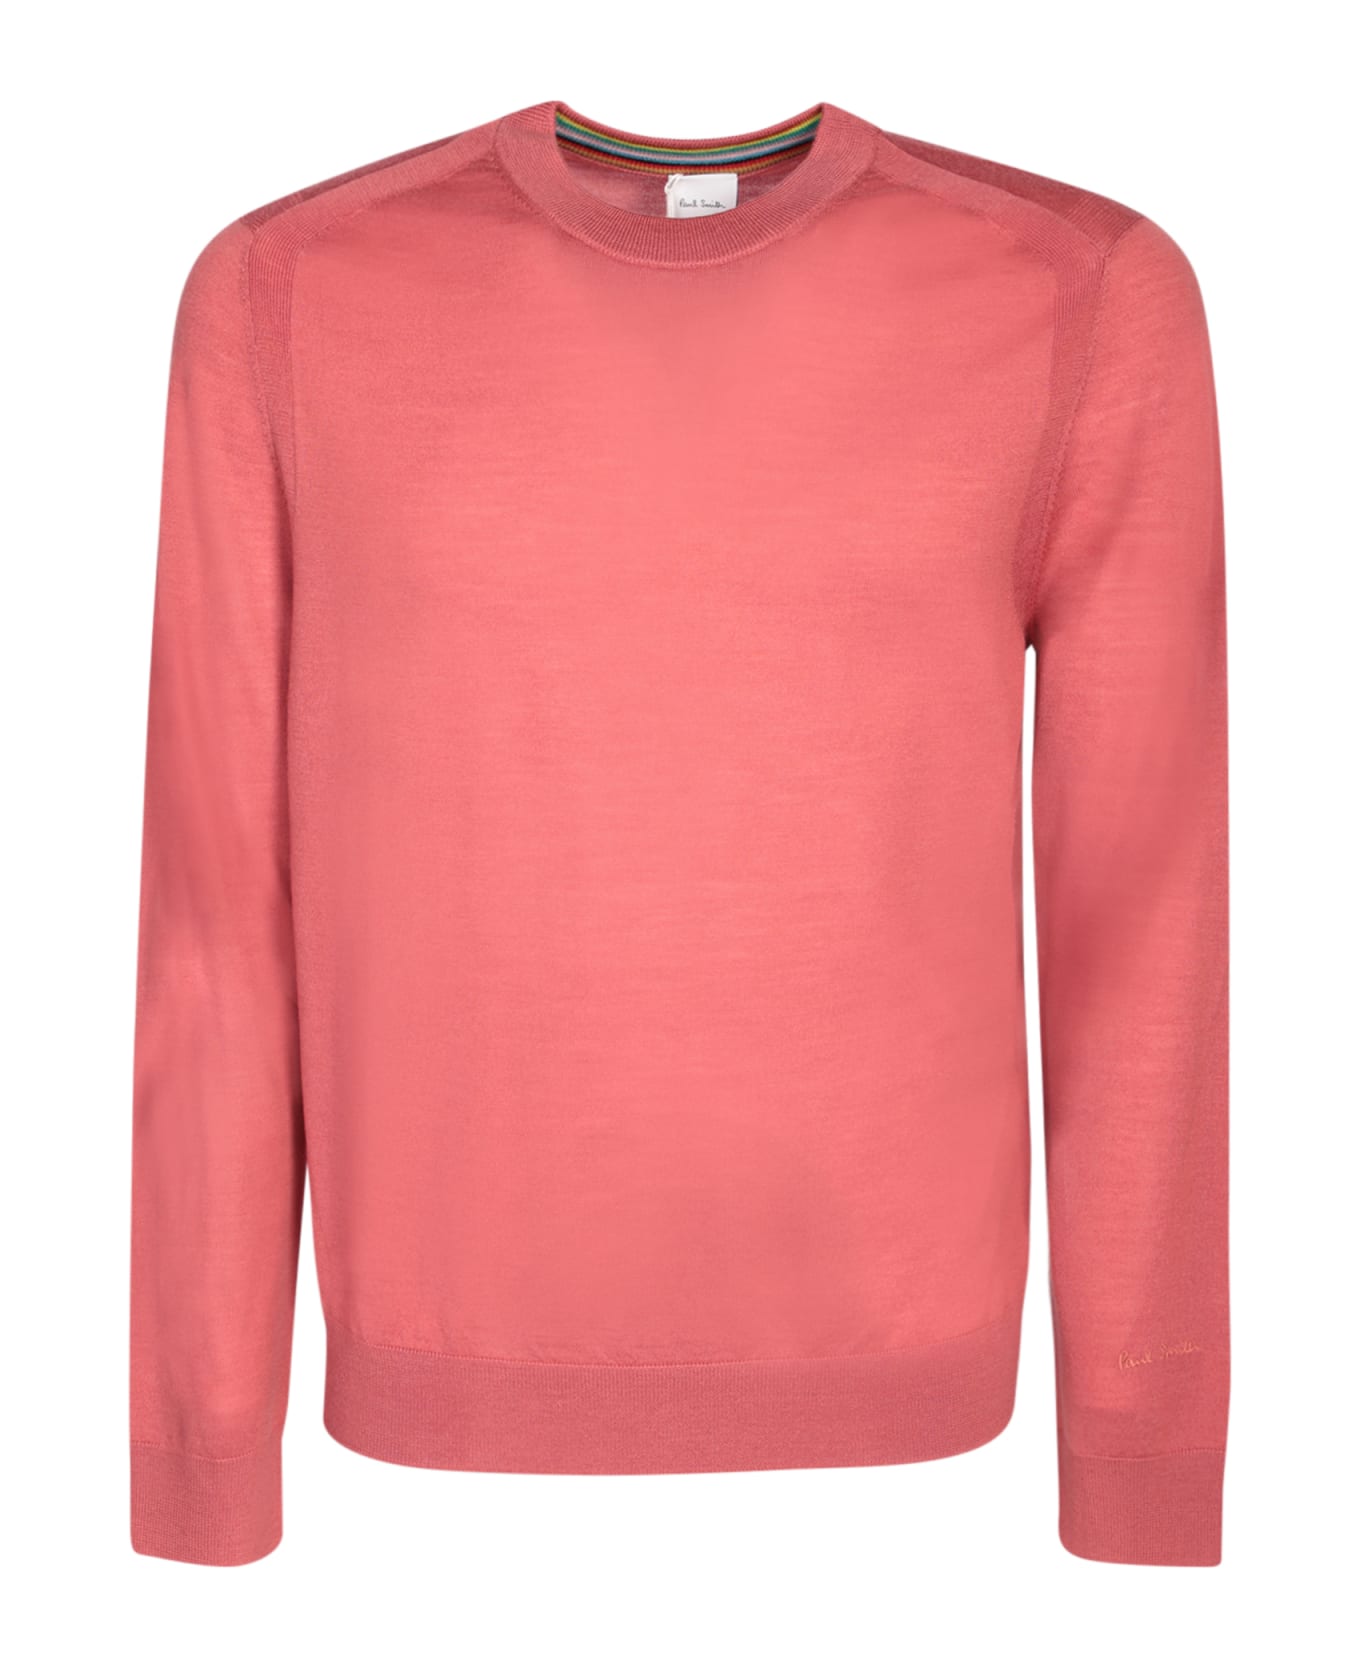 Paul Smith Merino Wool Red Pullover - Coral